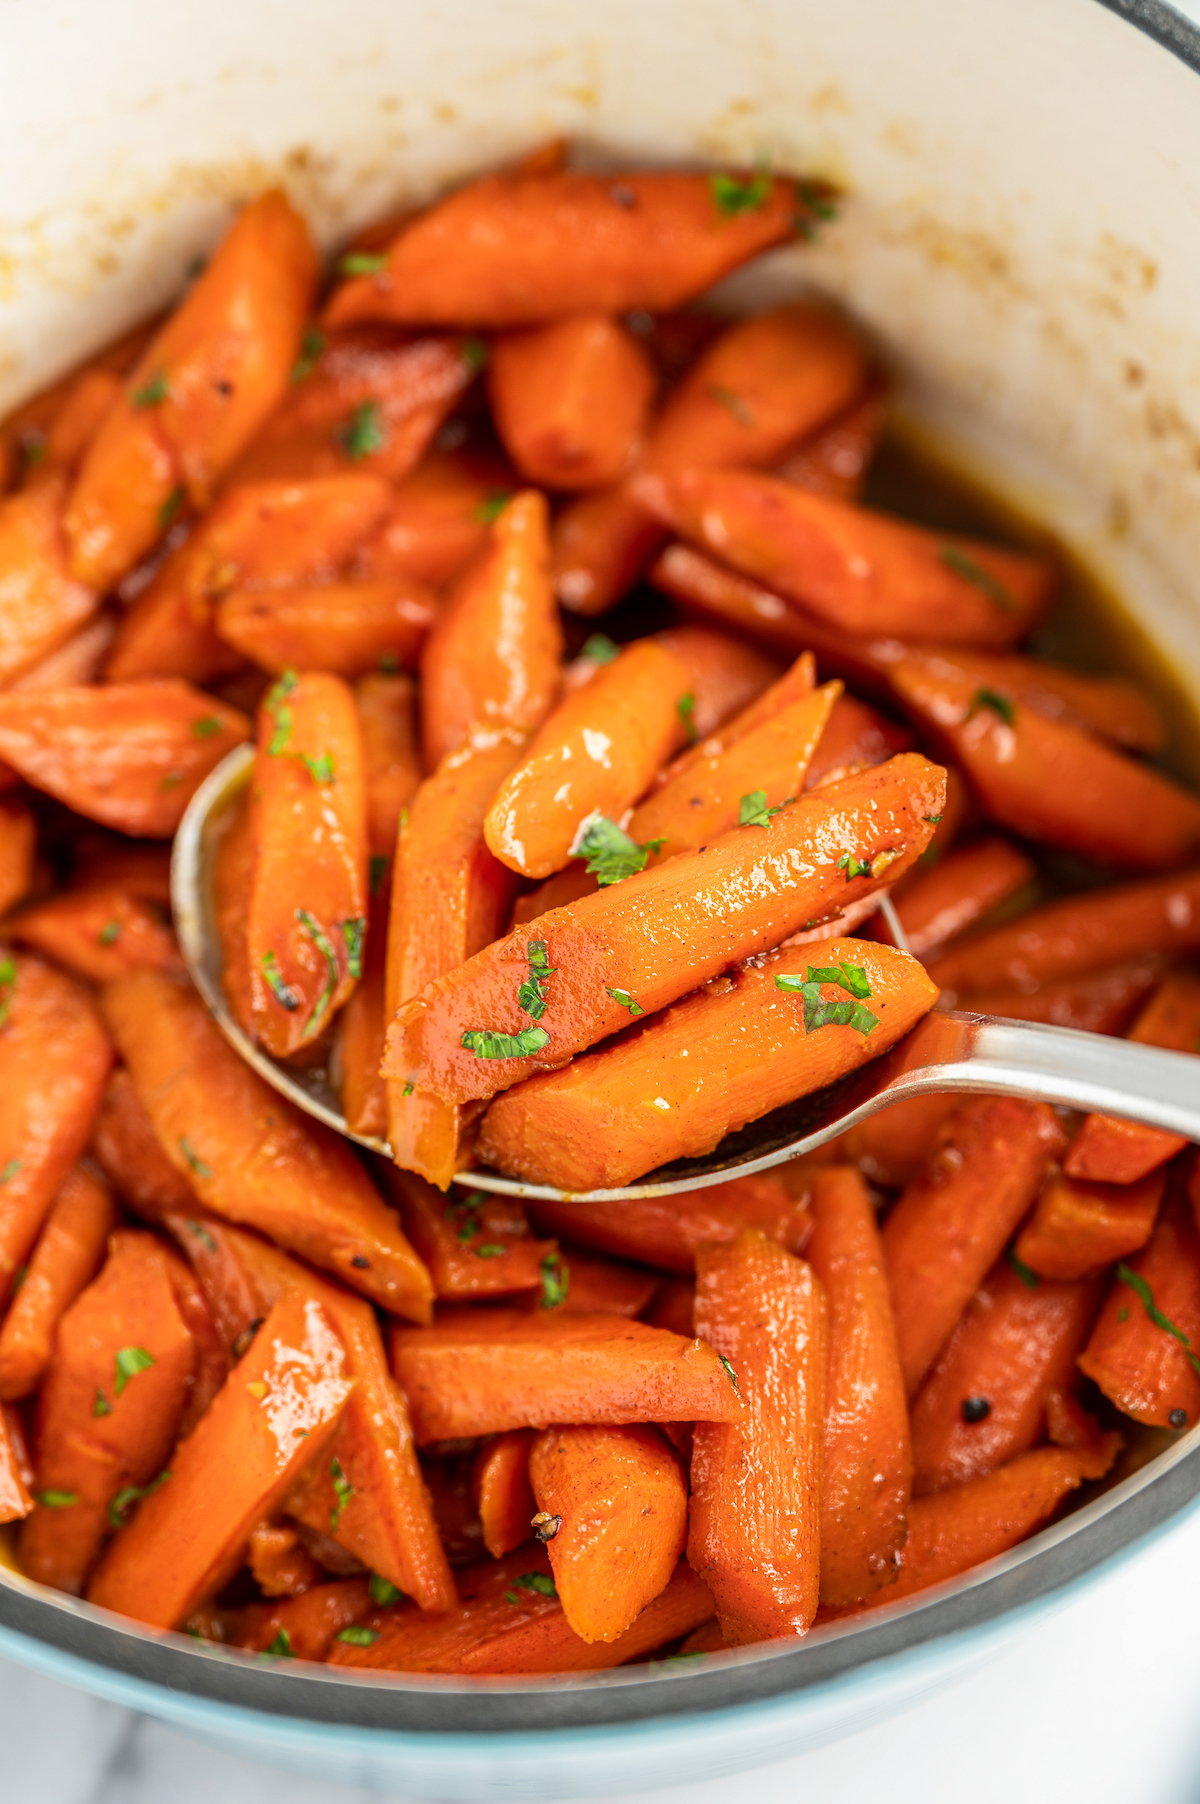 A spoon resting in a pot of glazed carrots.